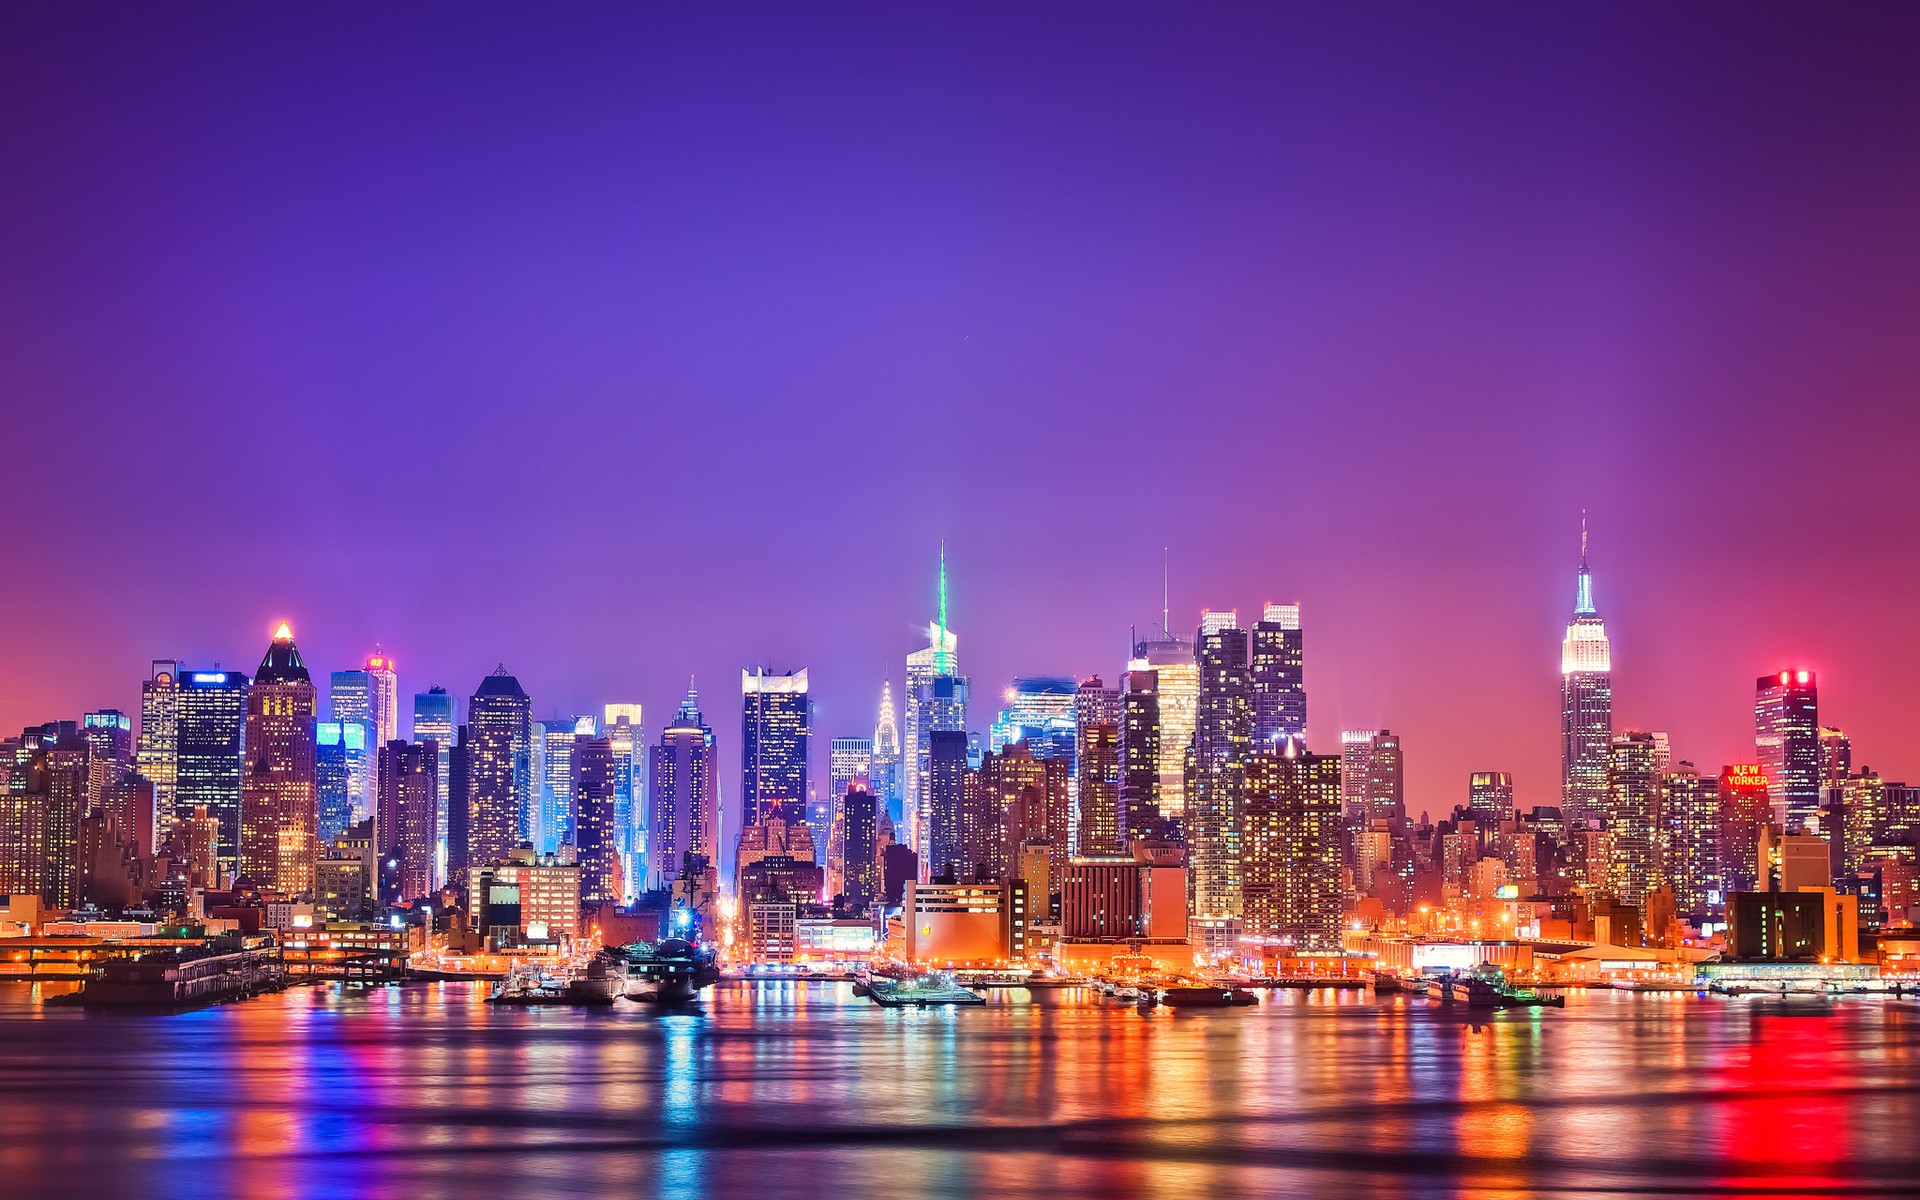 11 Amazing Images from New York City!